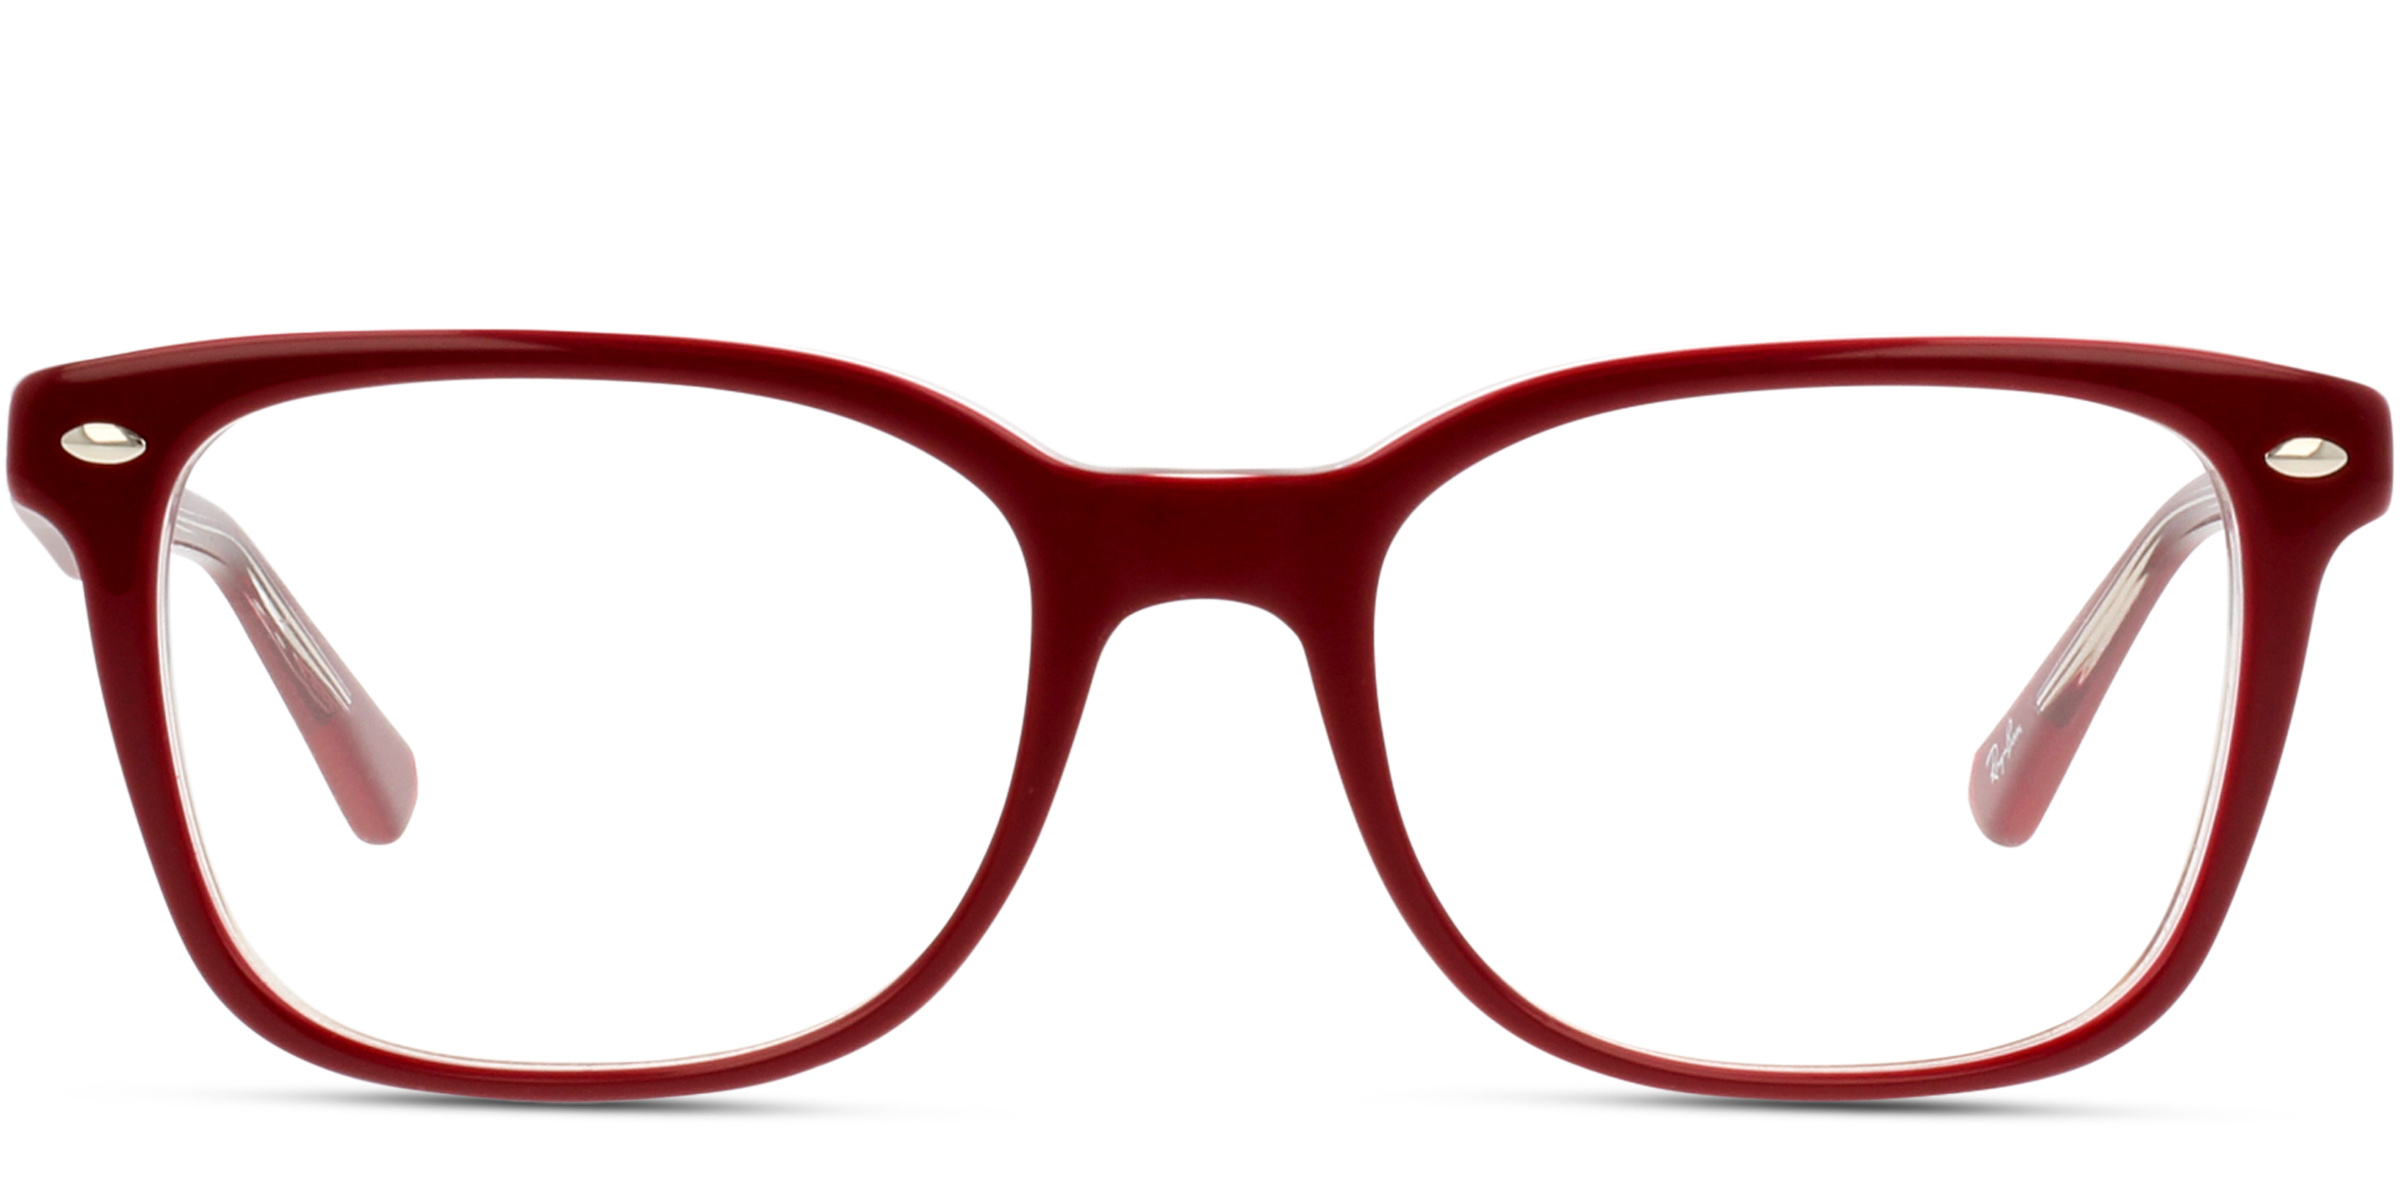 ray ban 5285 red